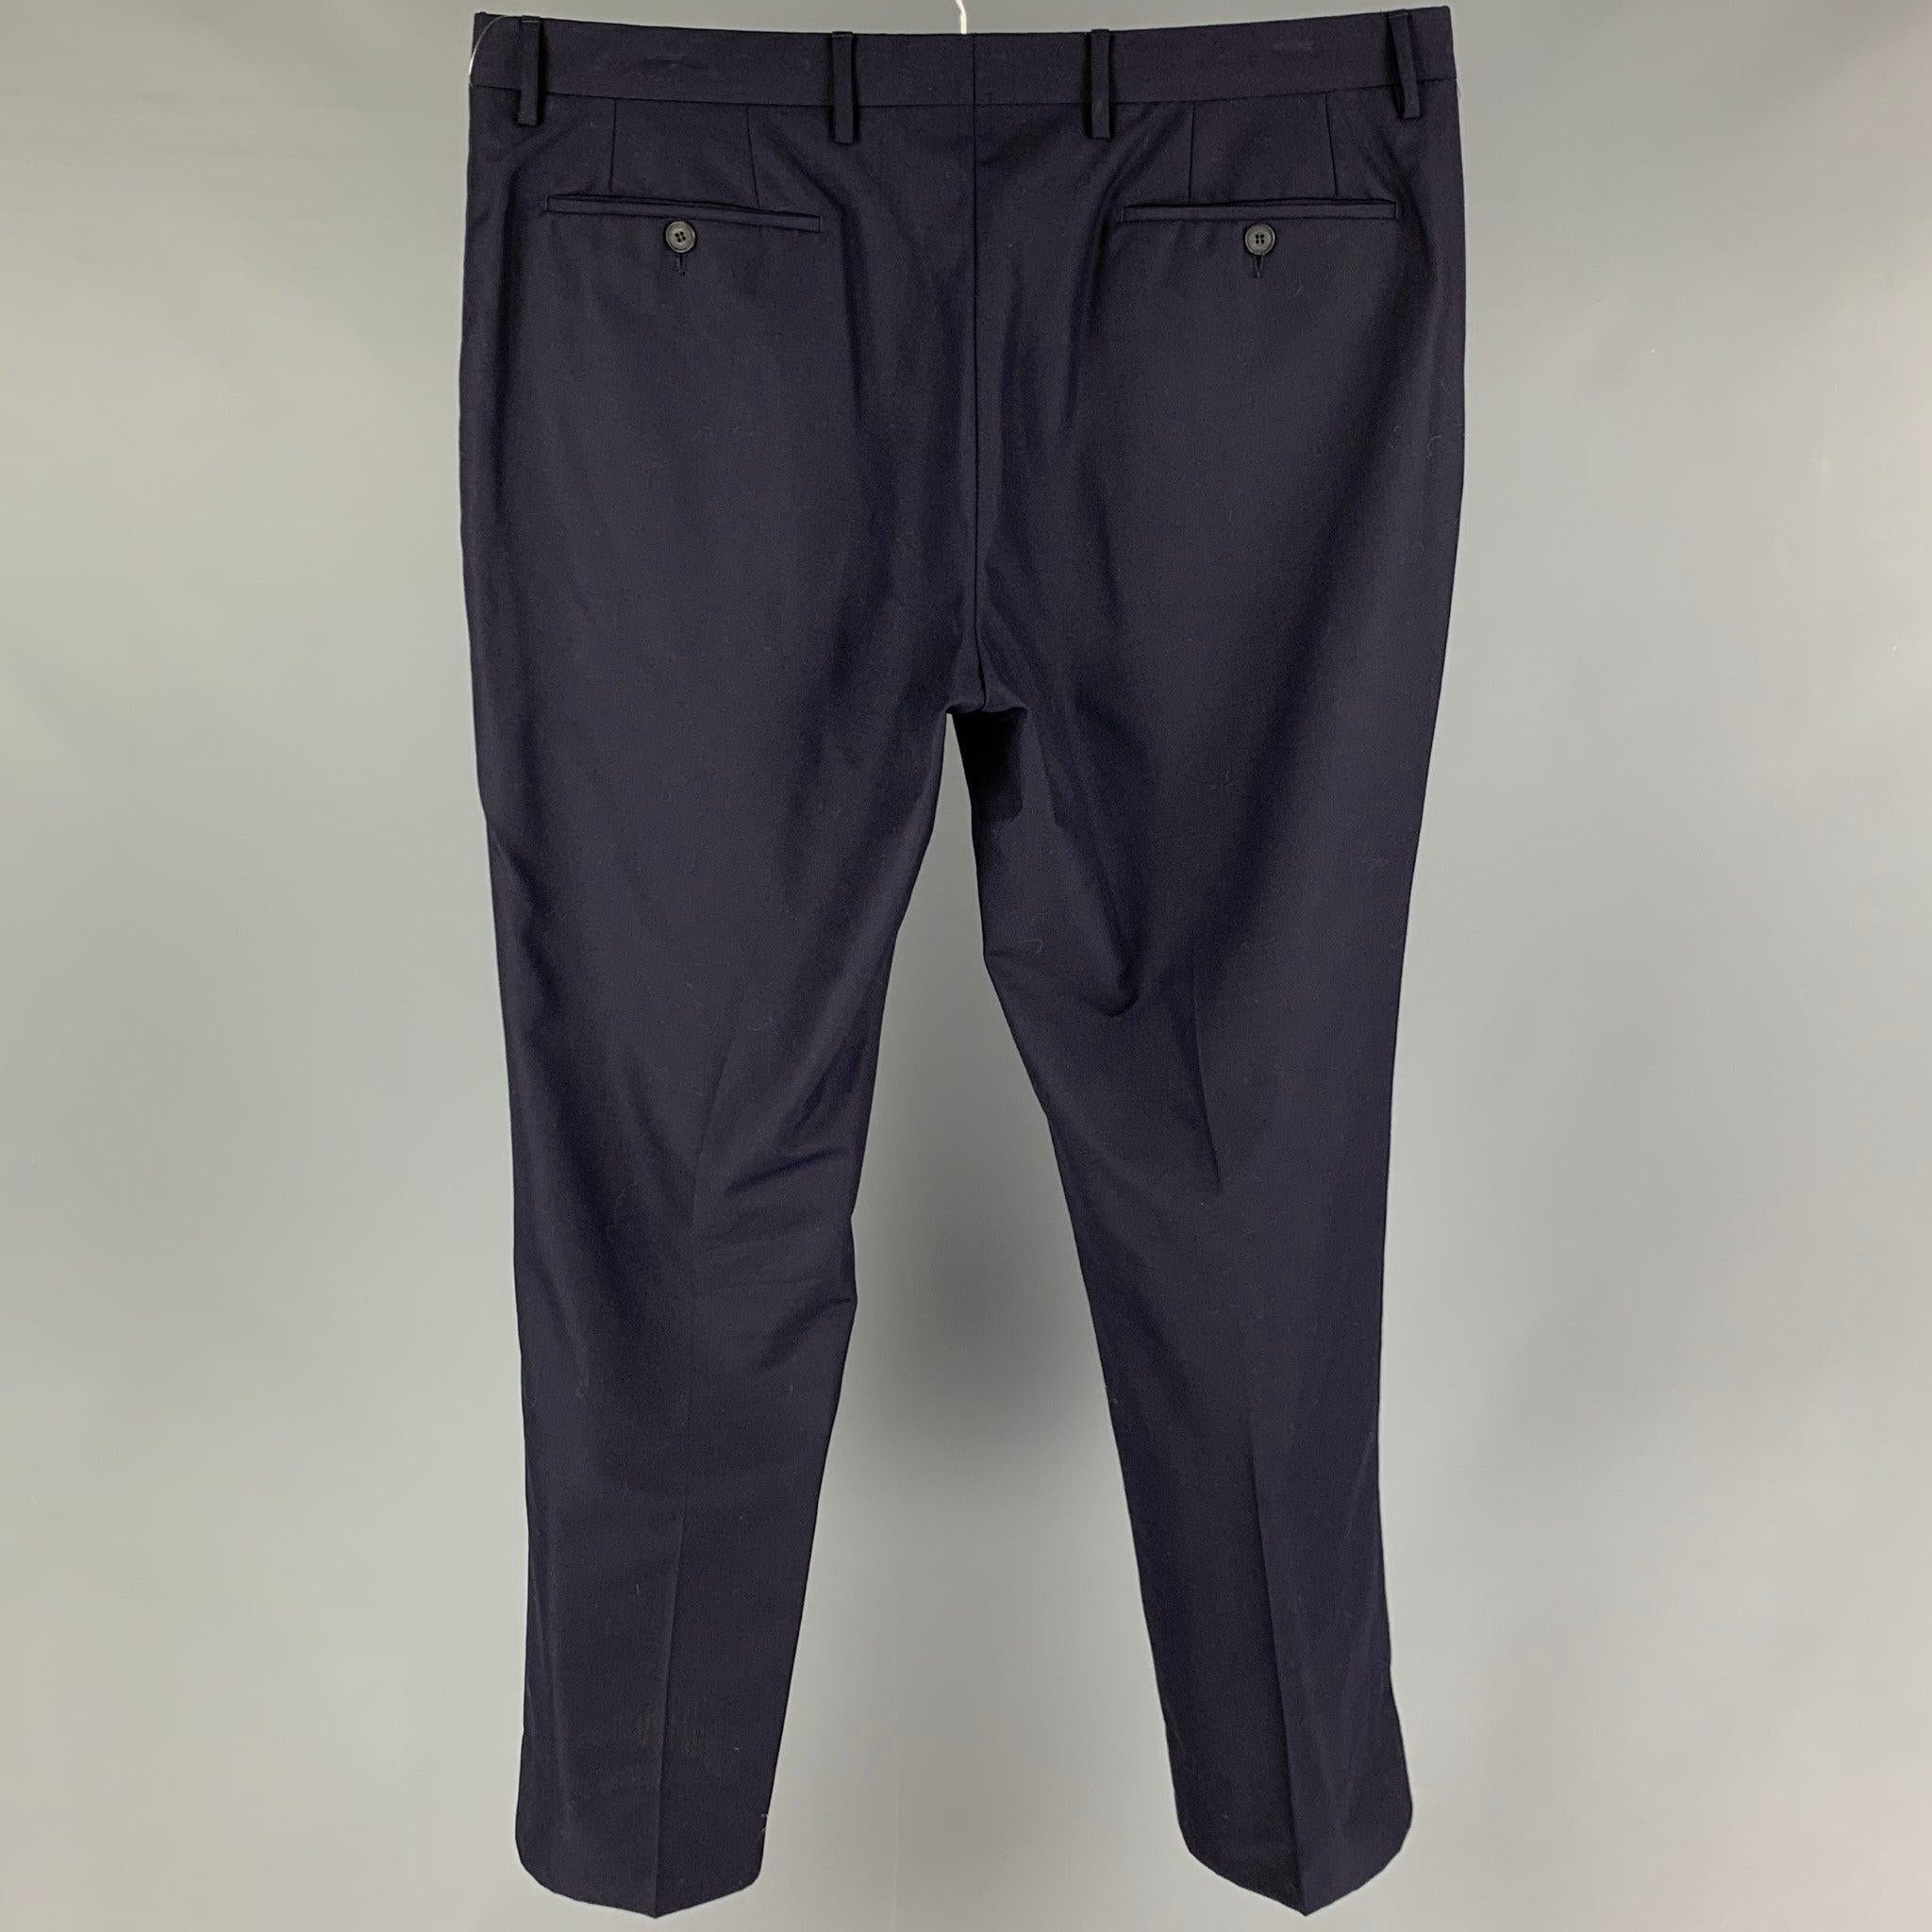 BURBERRY dress pants comes in a navy wool featuring a flat front, front tag, and a zip fly closure. Made in Italy.
Very Good
Pre-Owned Condition. 

Marked:  54R 

Measurements: 
 Waist: 38 inches Rise: 10 inches Inseam: 31 inches 
 
 
 
Reference: